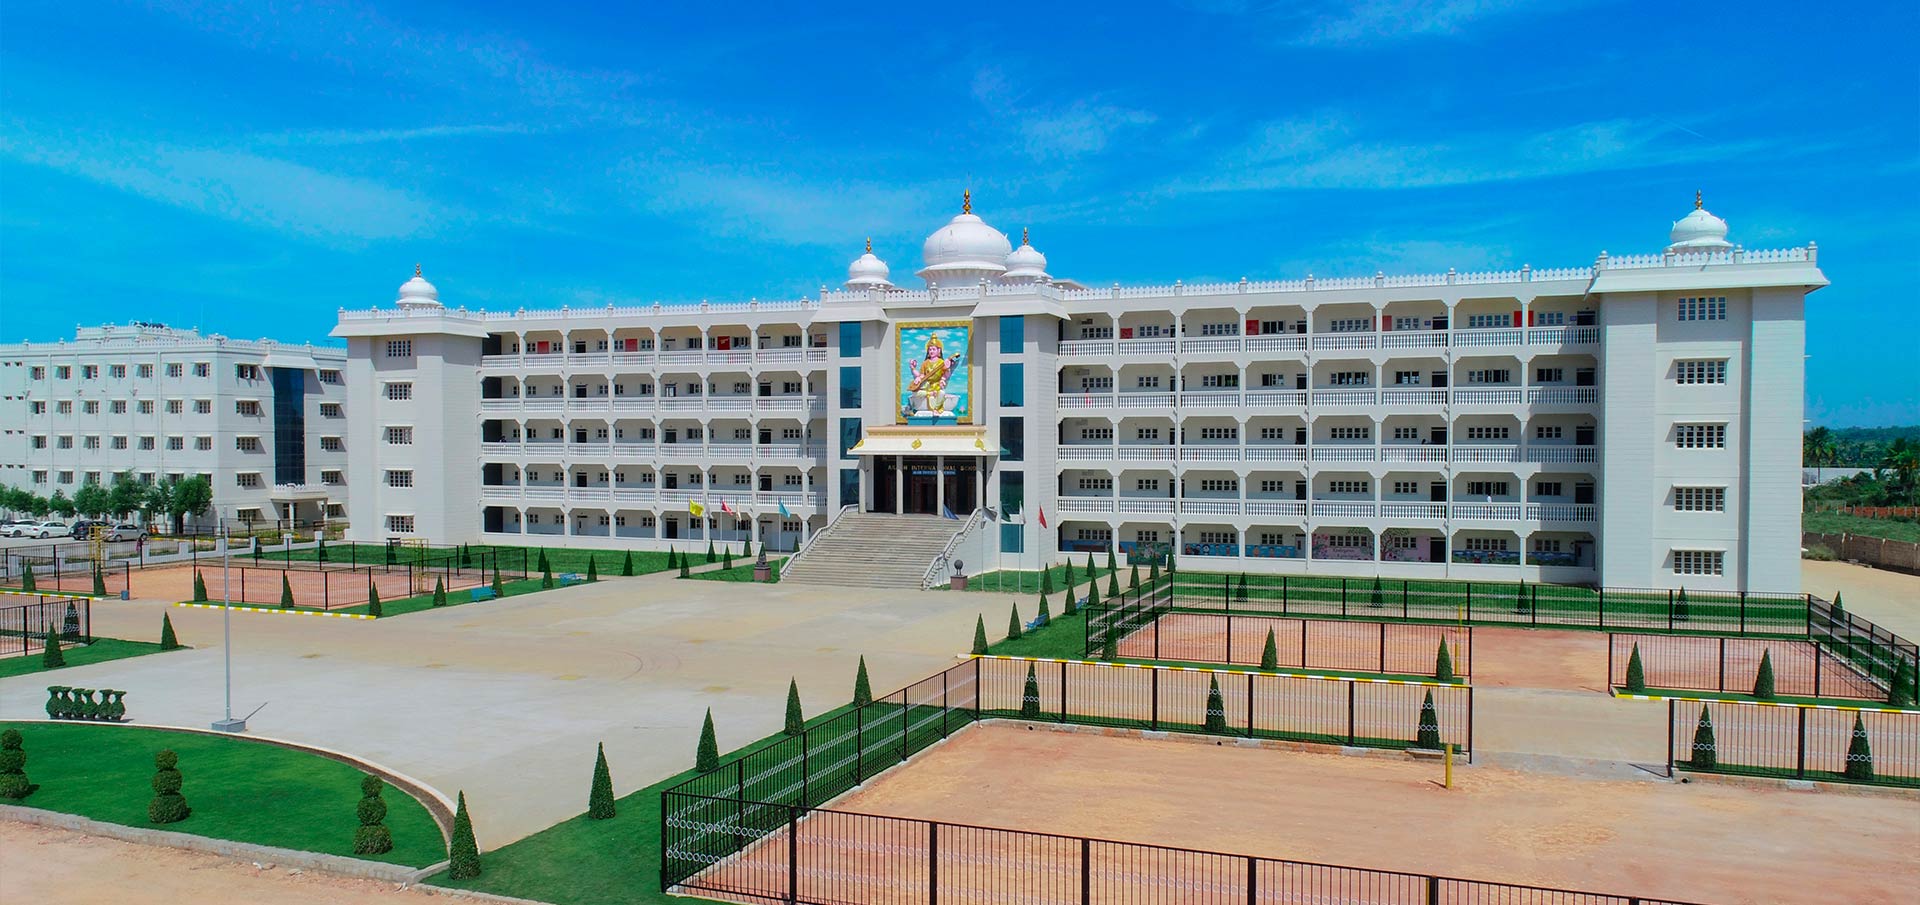 Akash Medical College Bangalore Admission, Courses Offered, Fees Structure, Recognition, Facilities